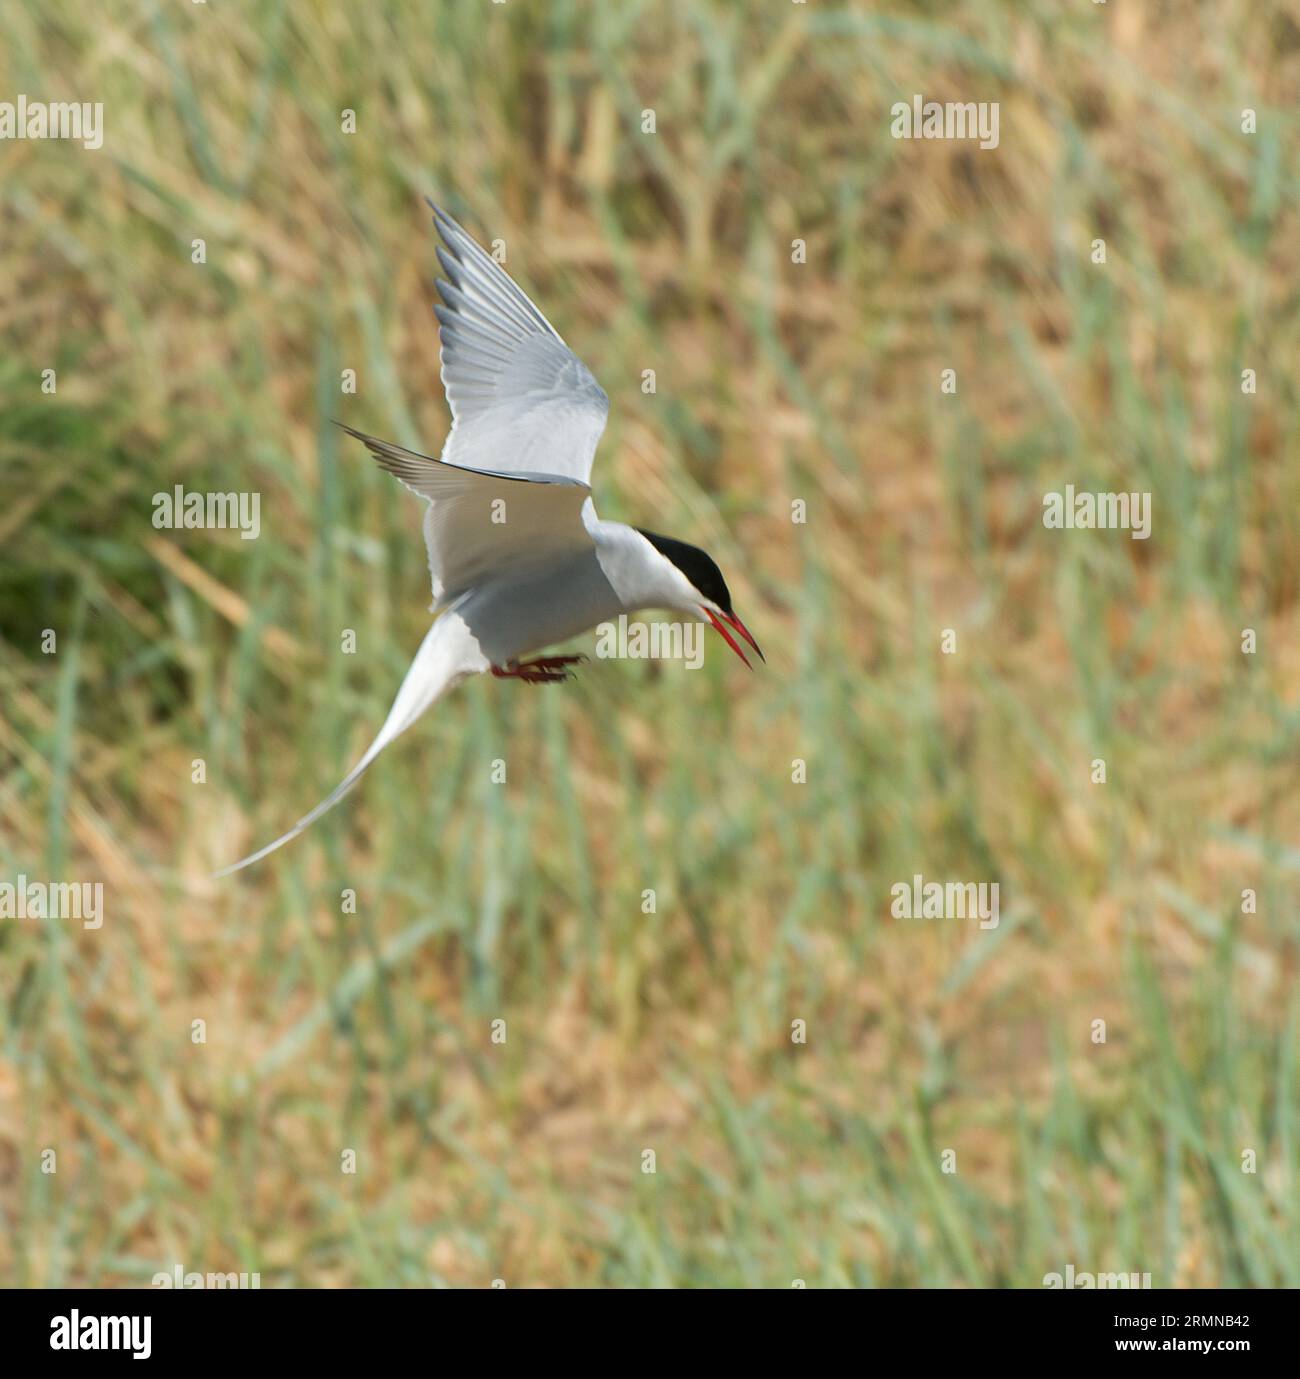 Square colour image of Arctic Tern in descent towards nest site among grass and sand dunes Stock Photo